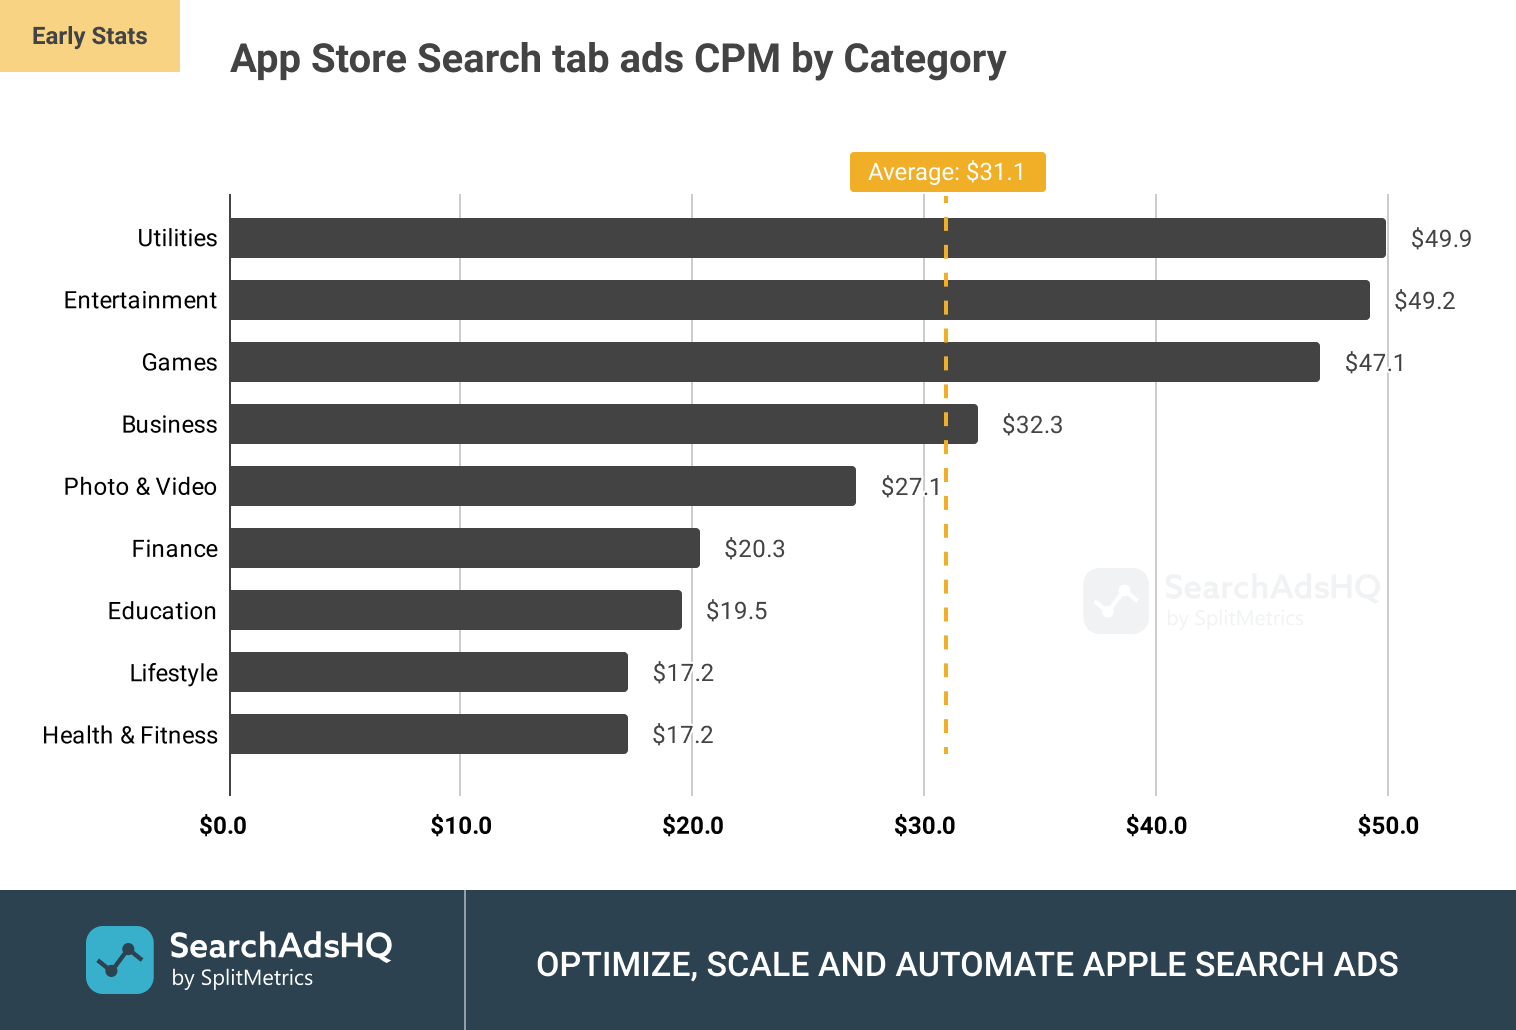 App Store Search tab ads: Average CPM (Cost per Thousand Impressions) by Category